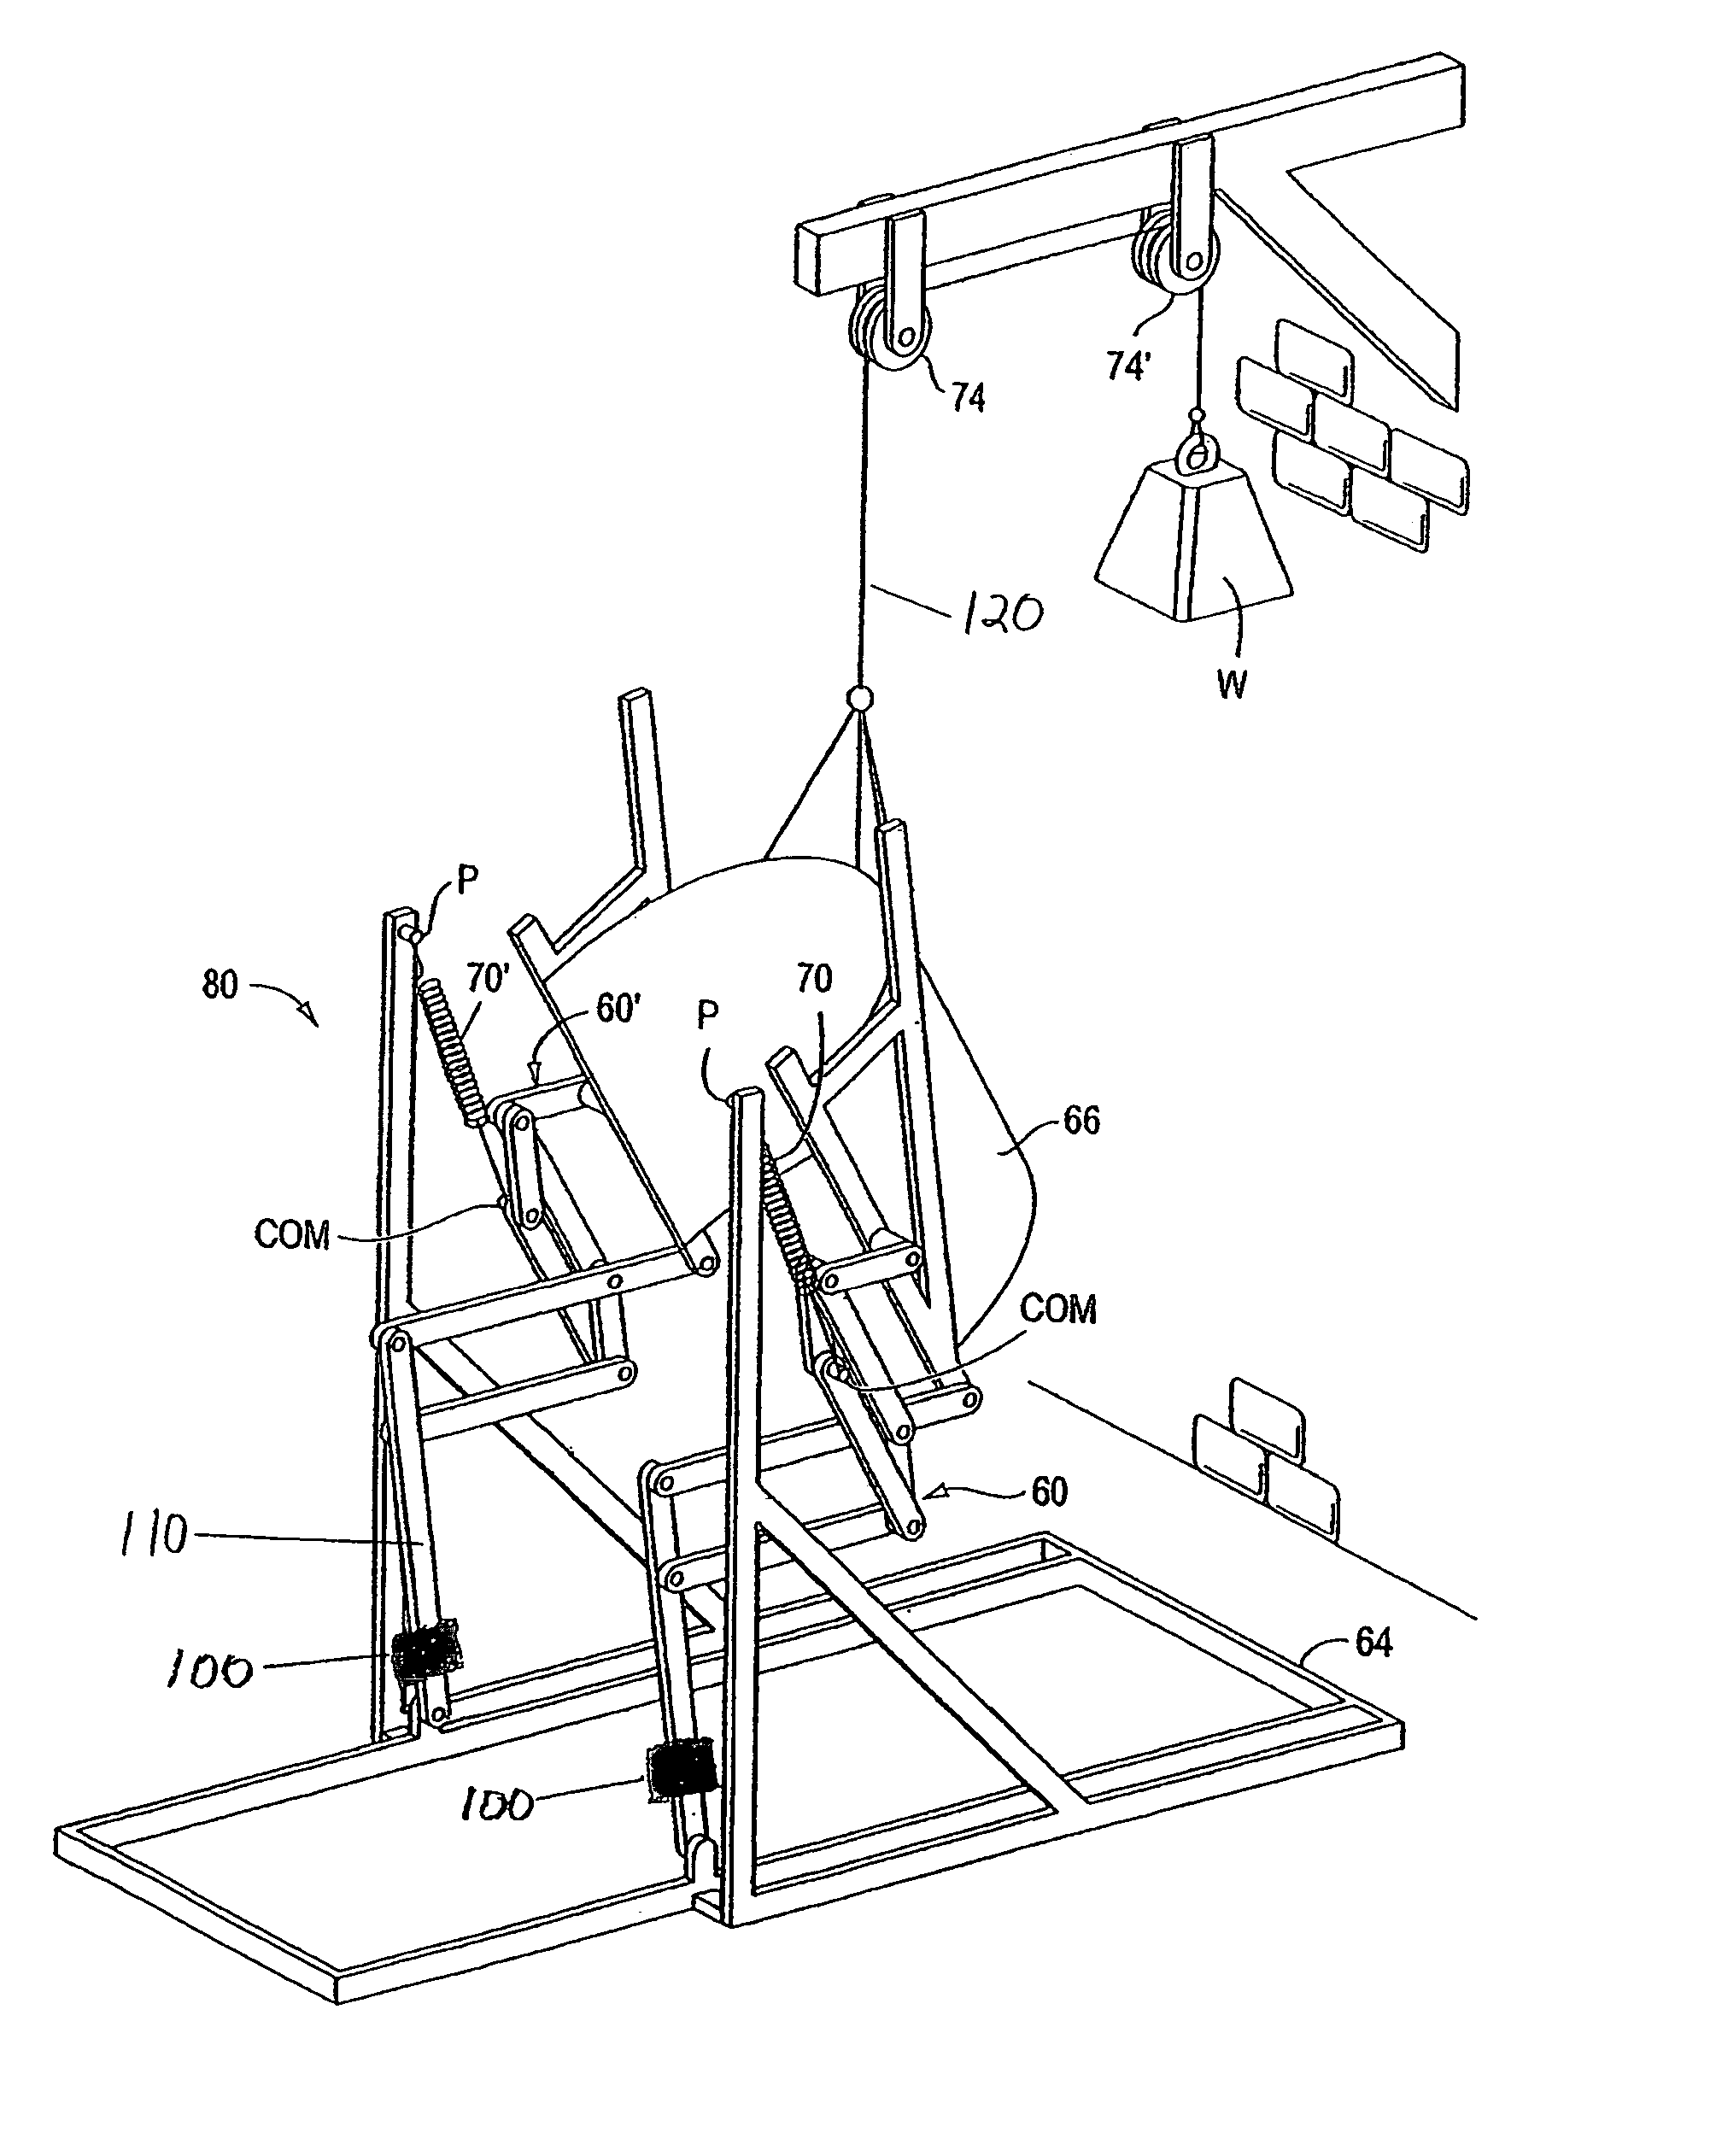 Passive gravity-balanced assistive device for sit-to-stand tasks